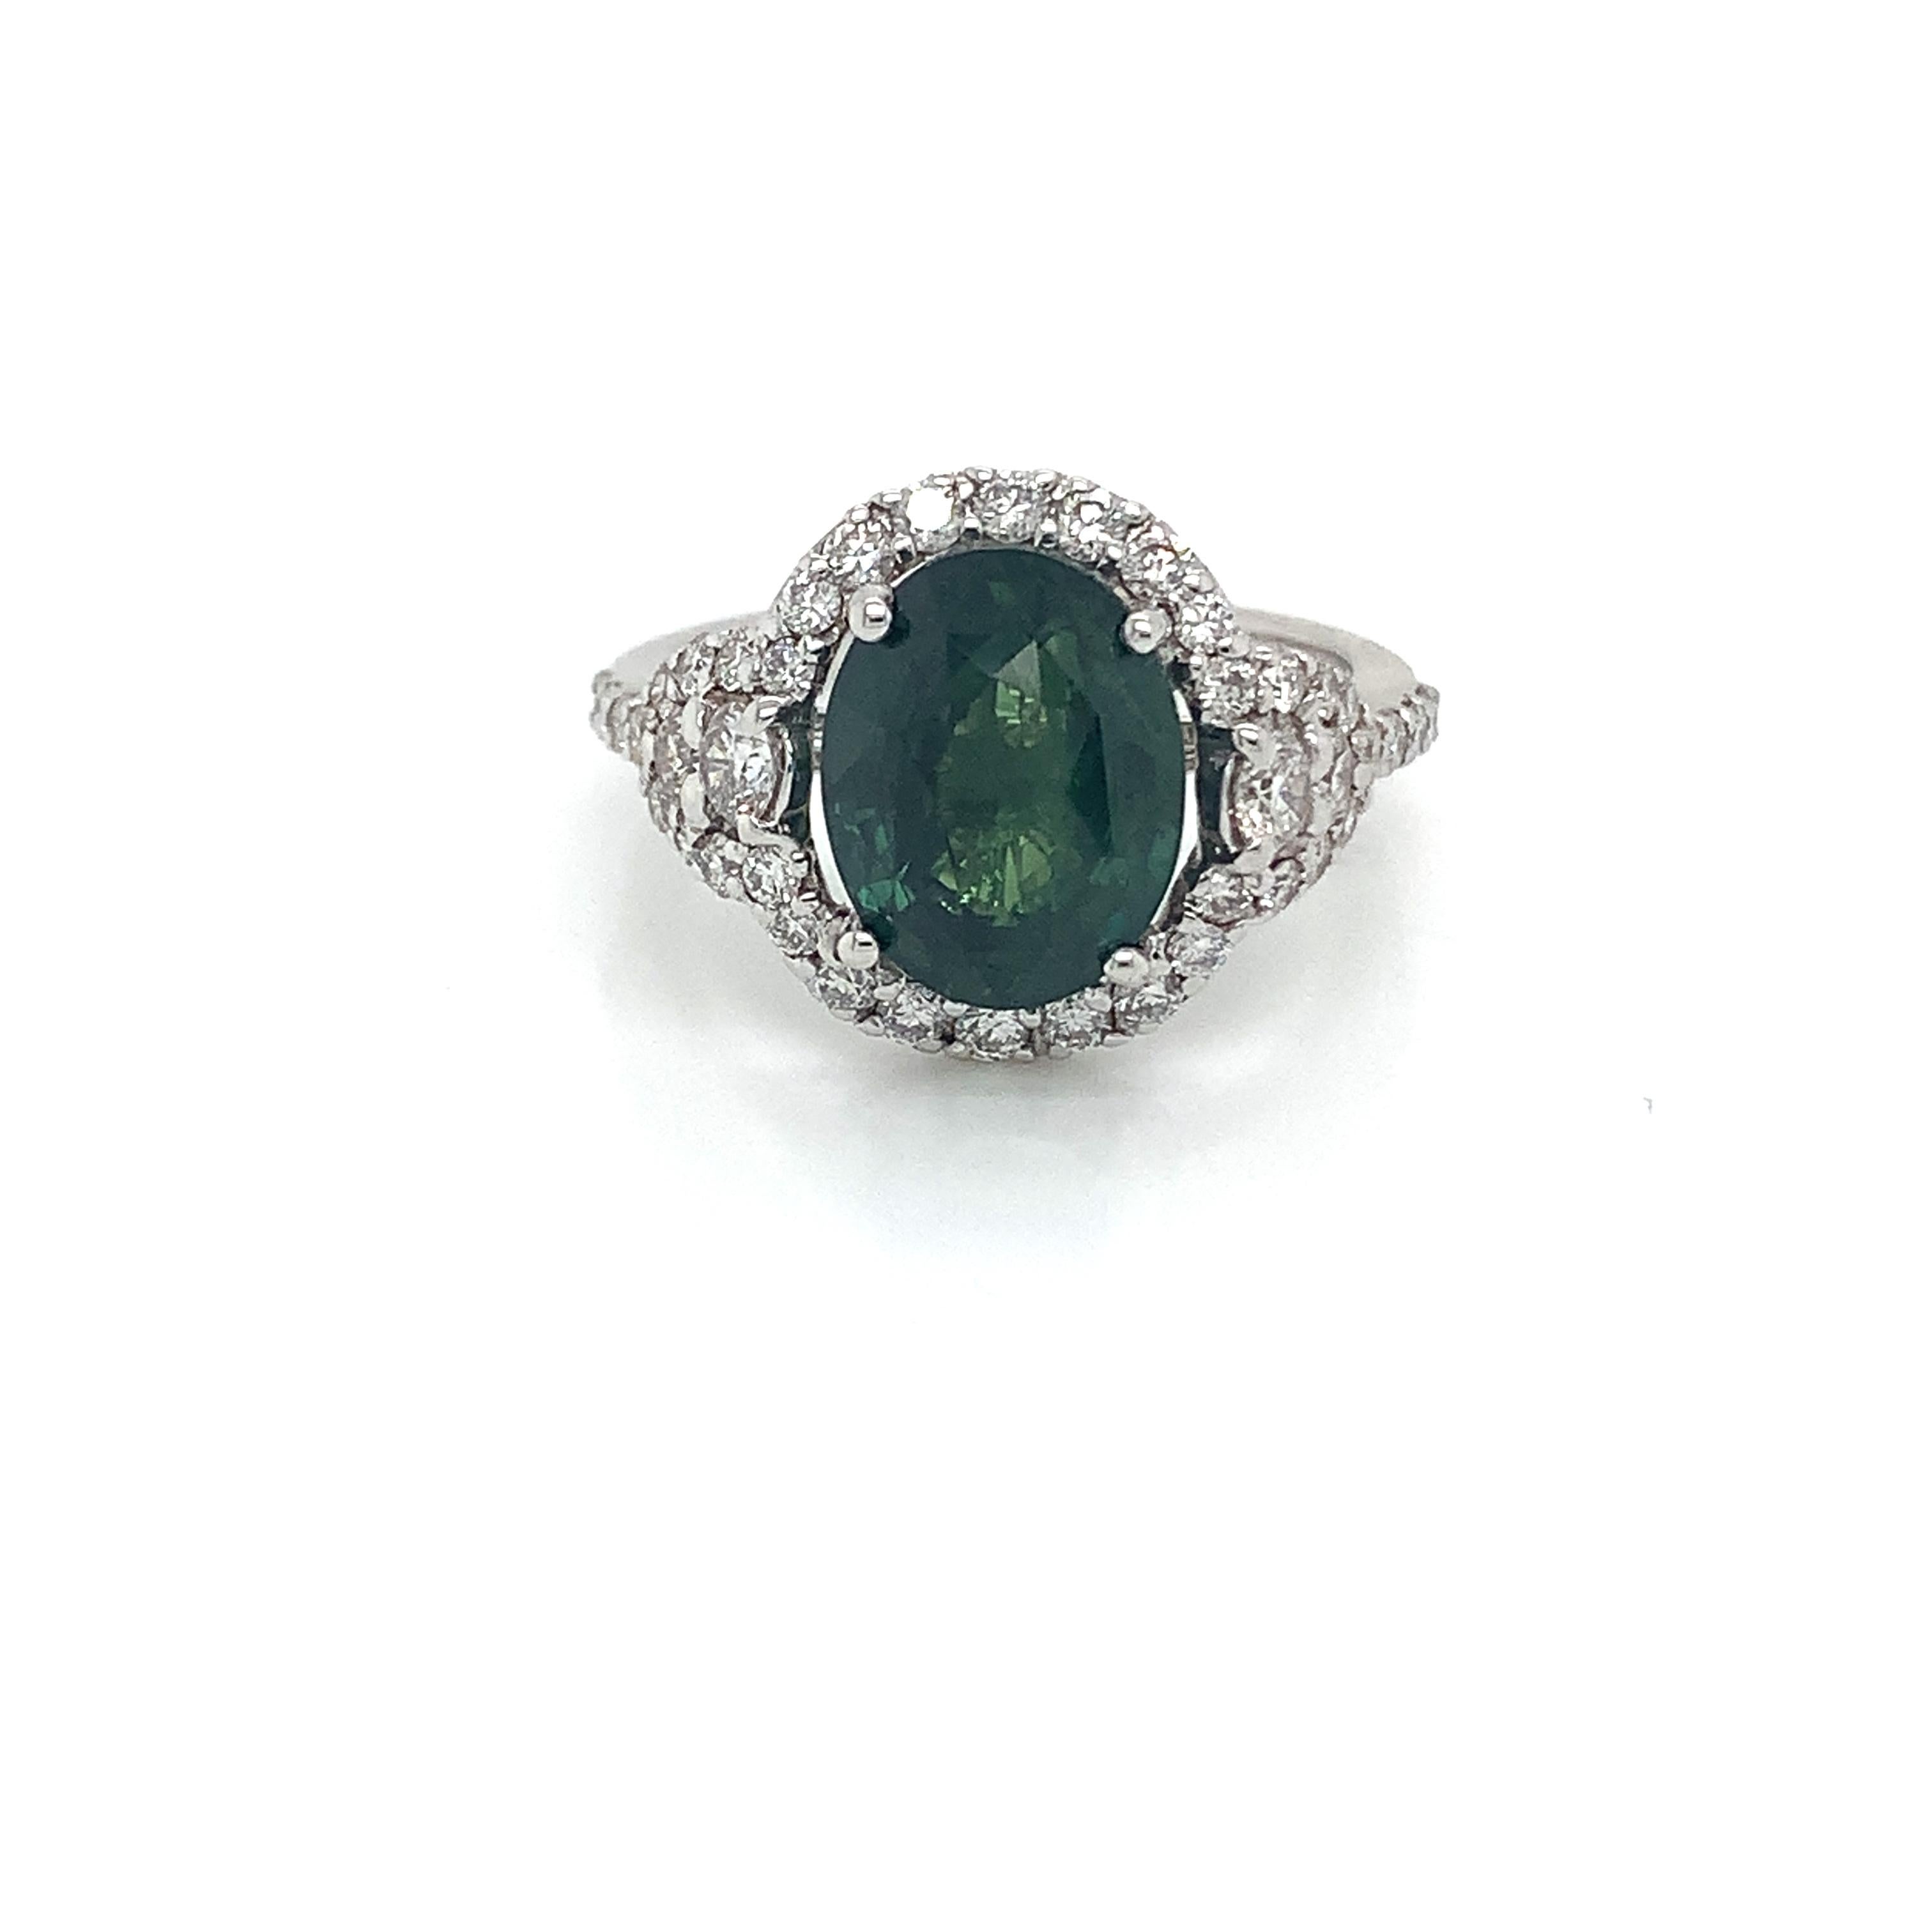 Oval green sapphire weighing 4.69 cts.
Measuring (10.7x8.3) mm
42  pieces of diamonds weighing .98 cts.
Set in 18K white gold ring